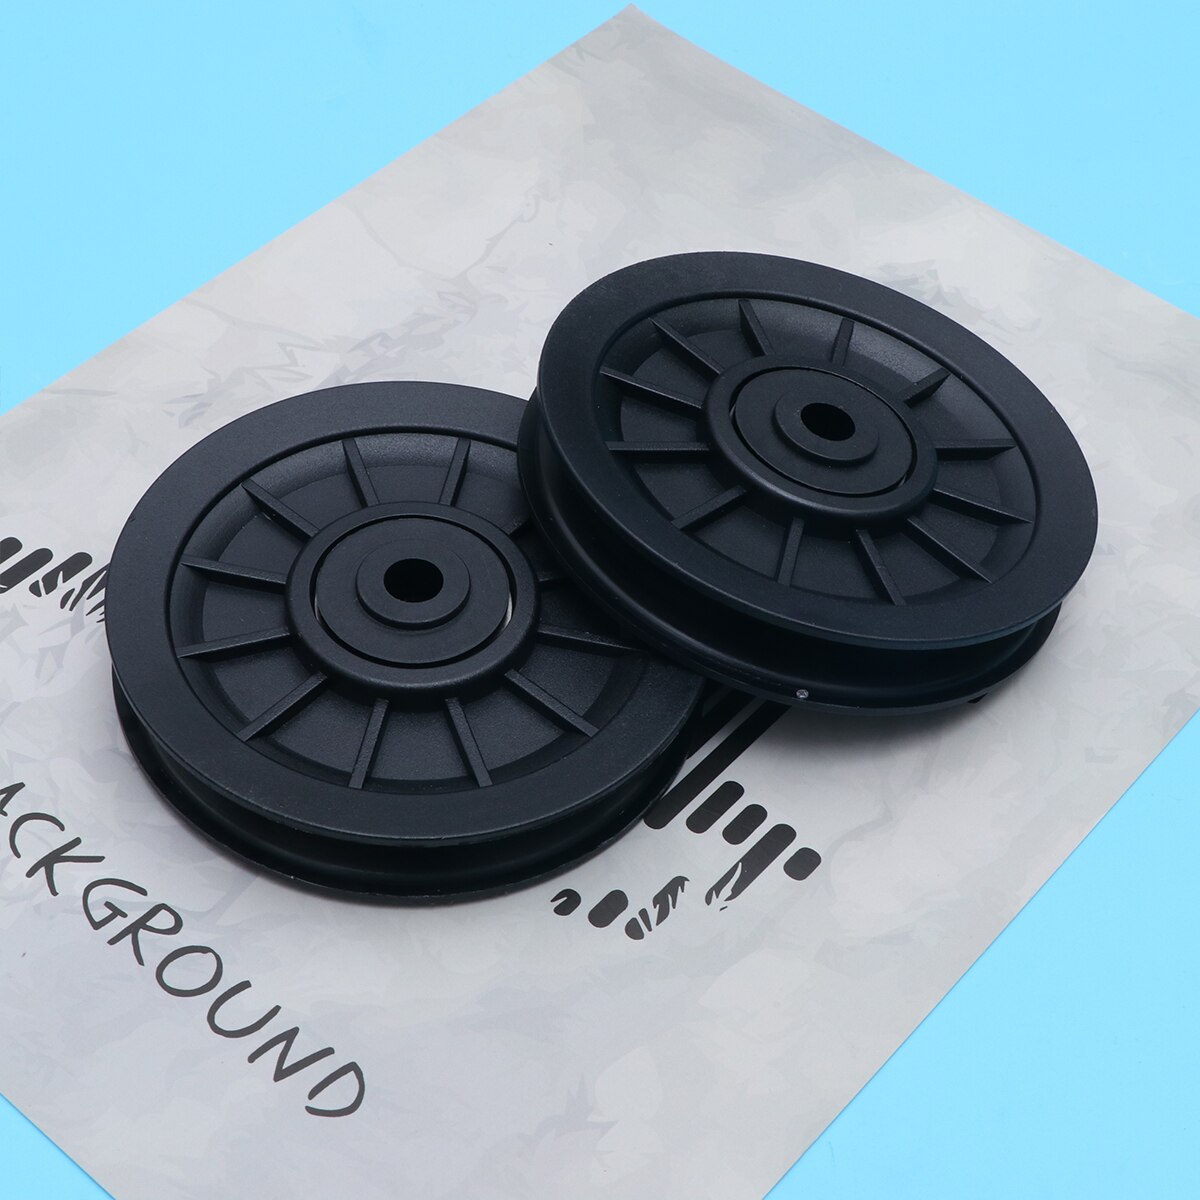 2Pcs Universal Bearing Pulley Wheel Fitness Equipment Part Wearproof Pulley Replacement Parts For Gym Fitness Black